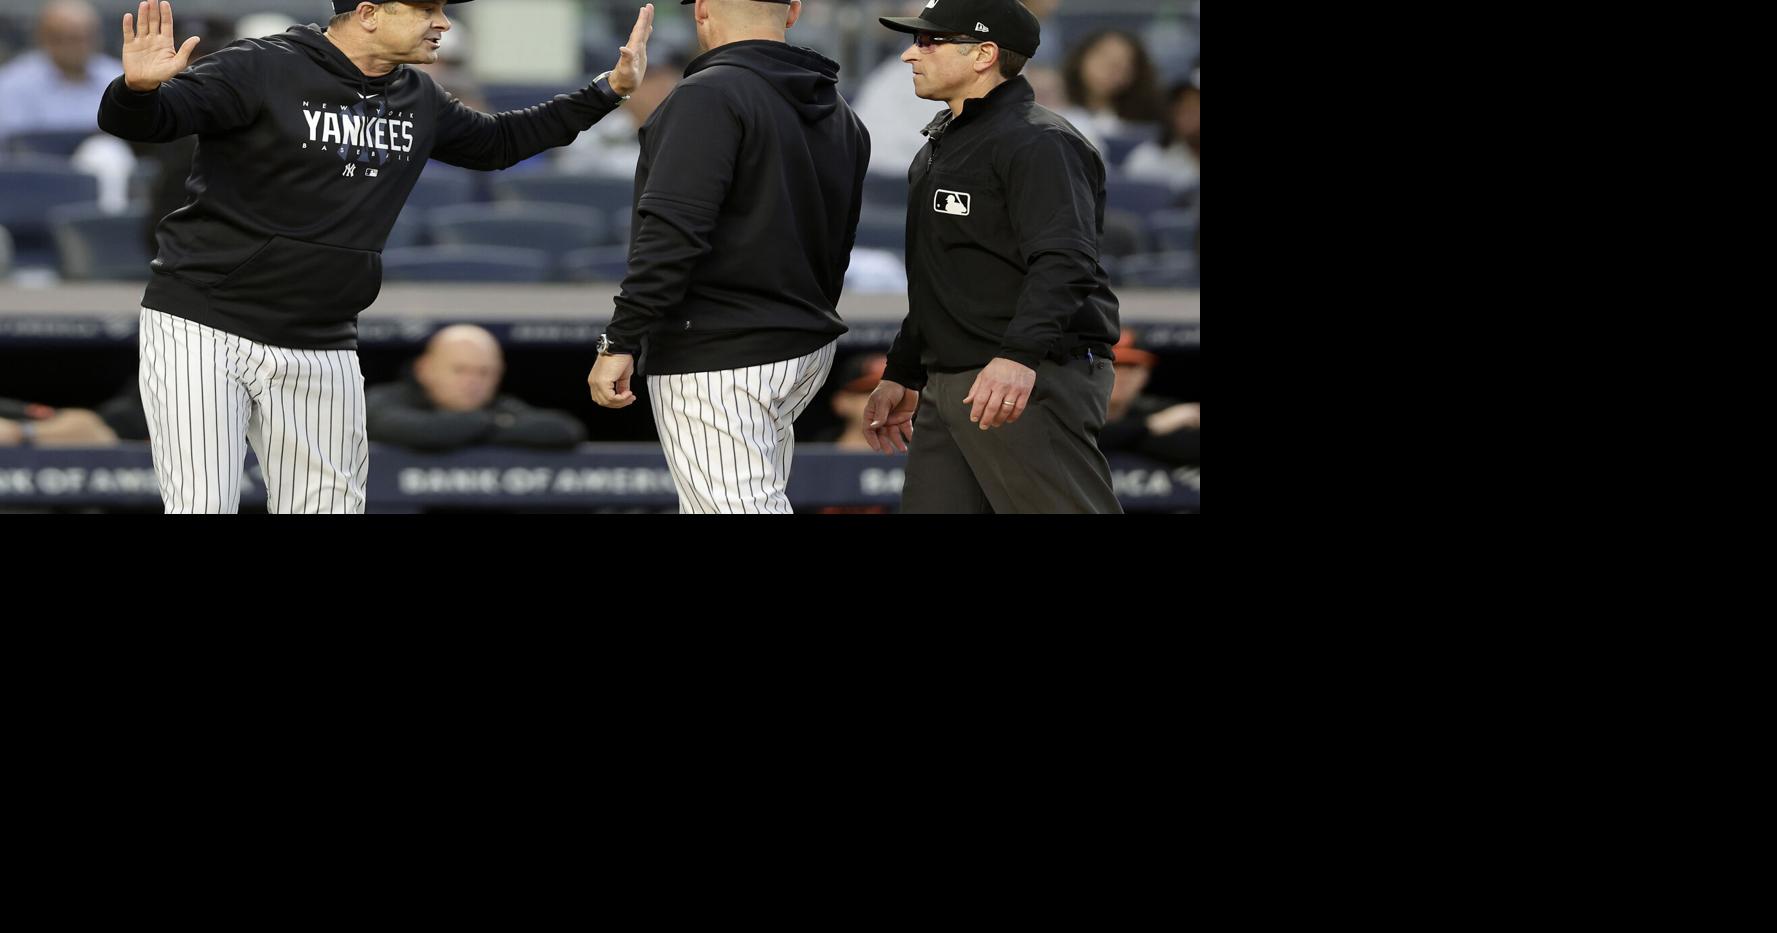 Community Poll: Do you approve of the Yankees hiring Aaron Boone